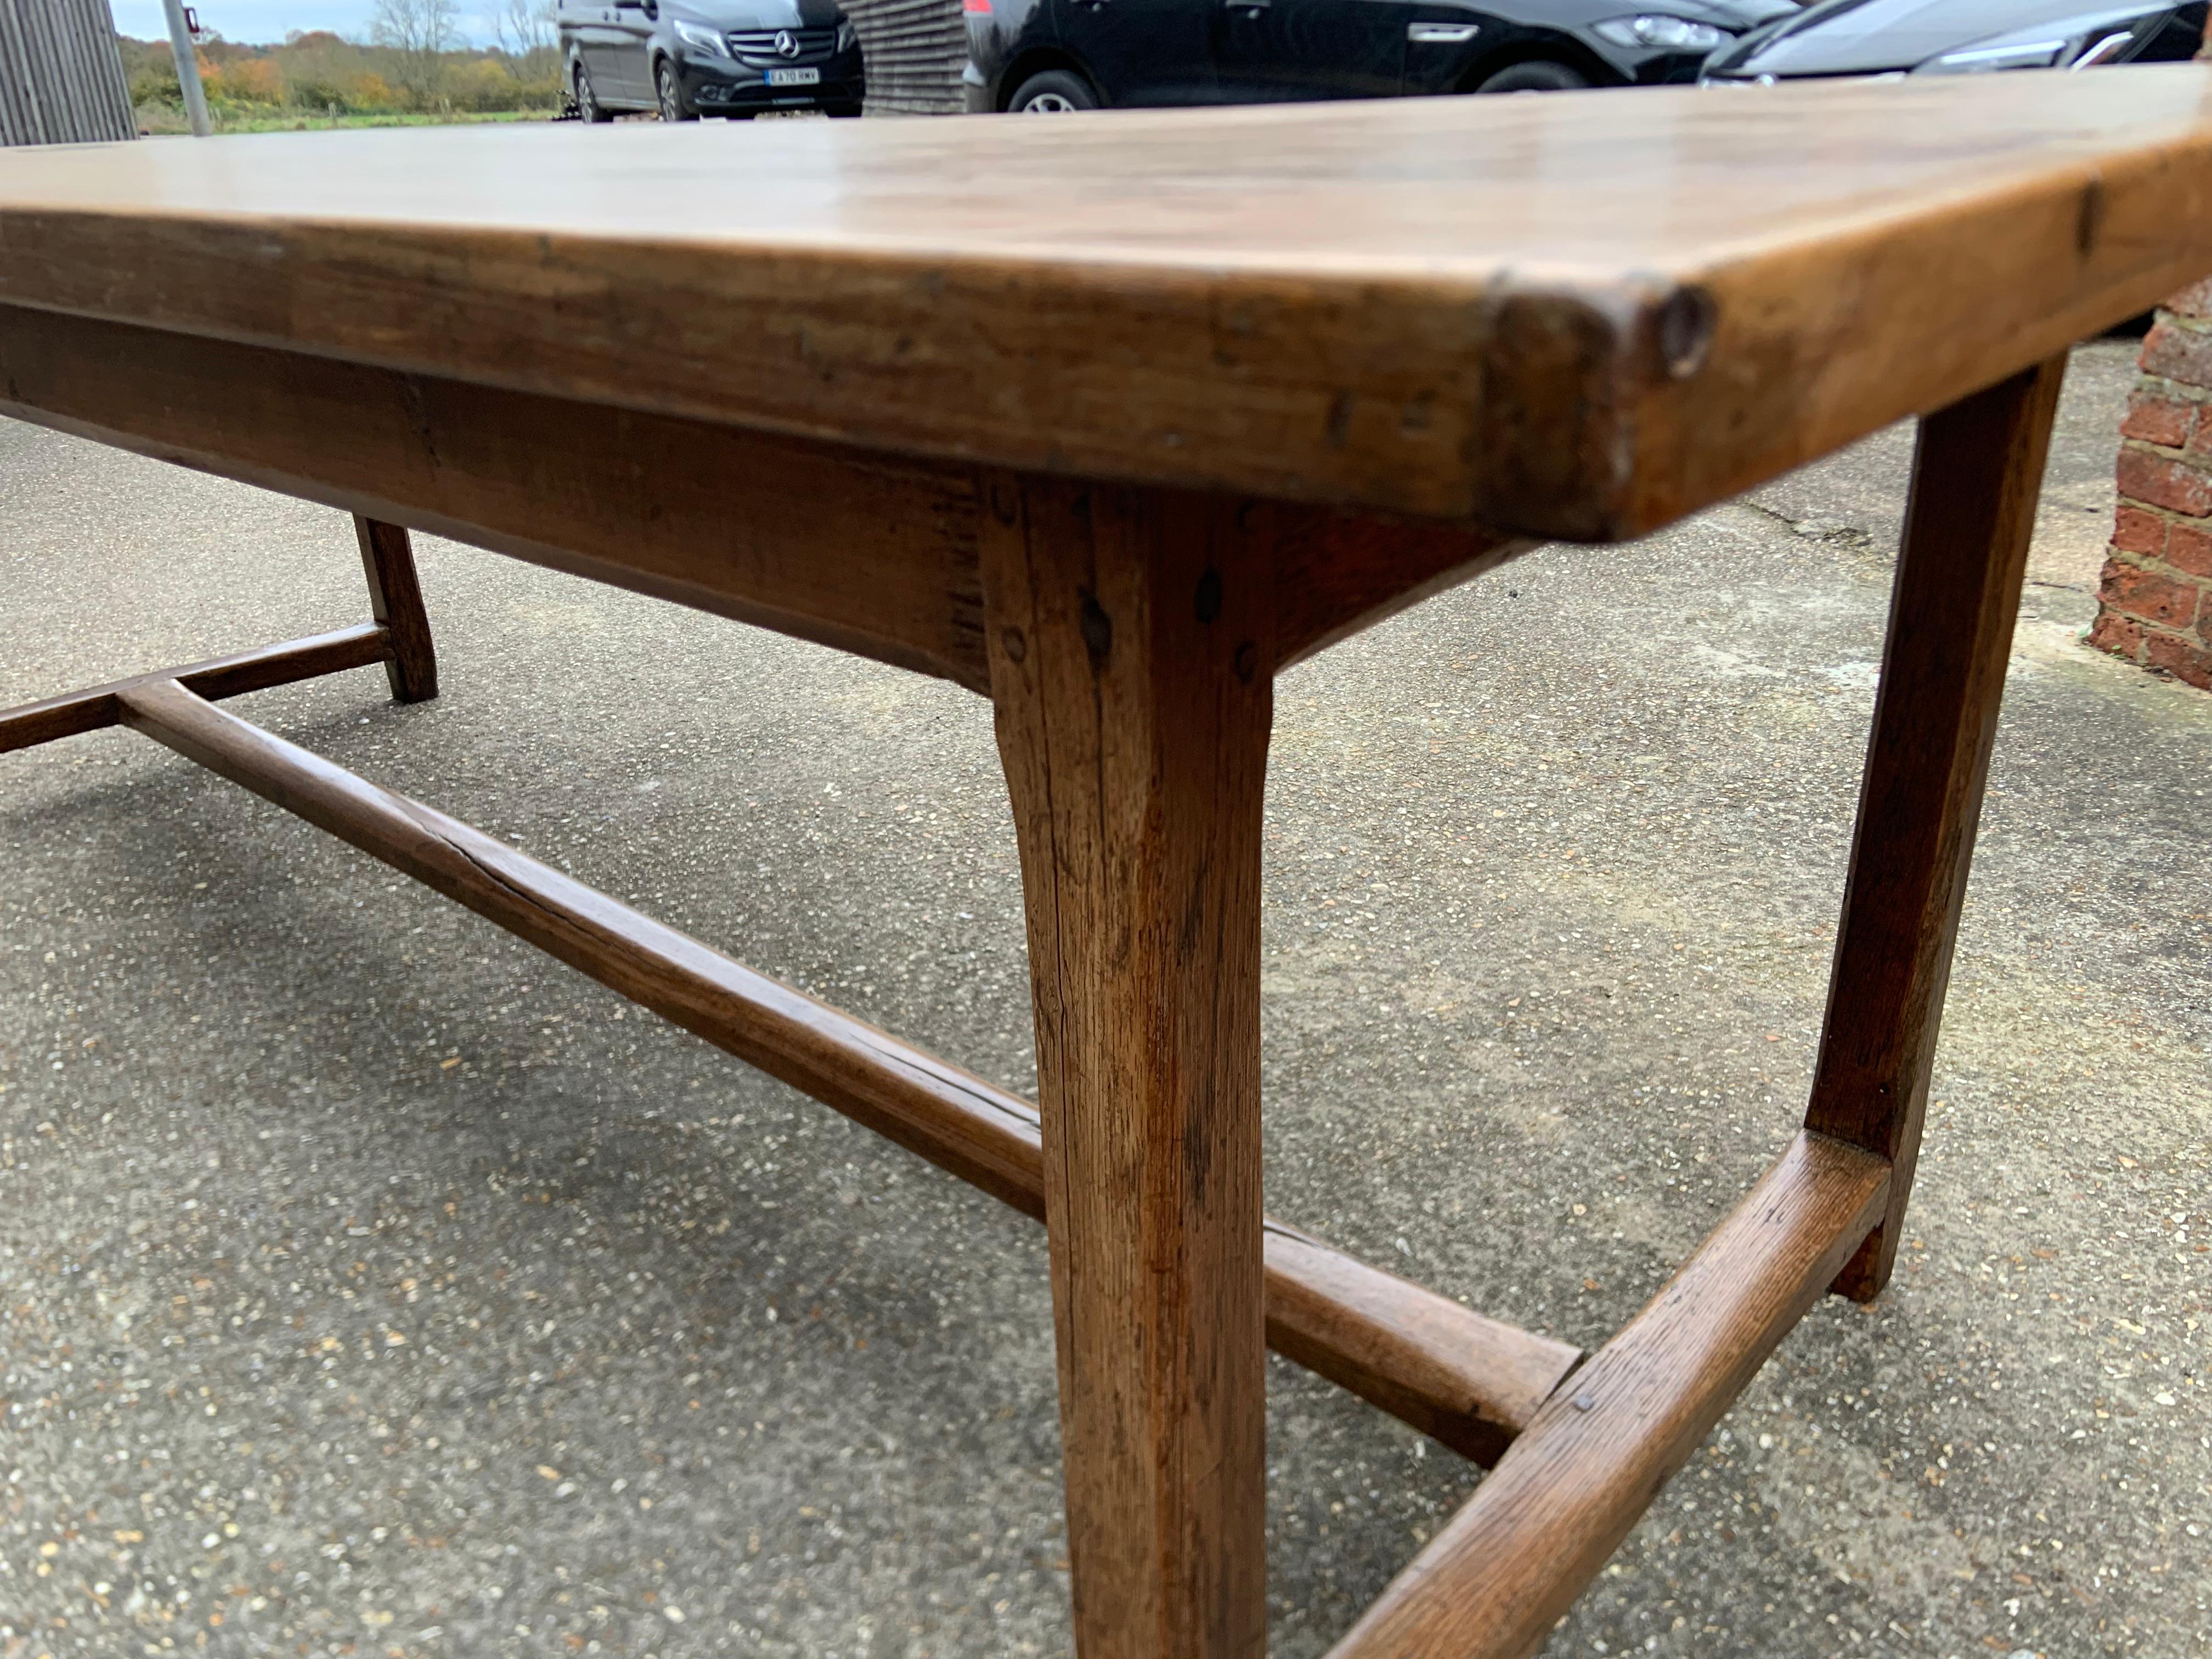 Antique pale cherry and oak farmhouse table with centre stretcher. Beautiful figured three plank top with oak centre stretcher.
   